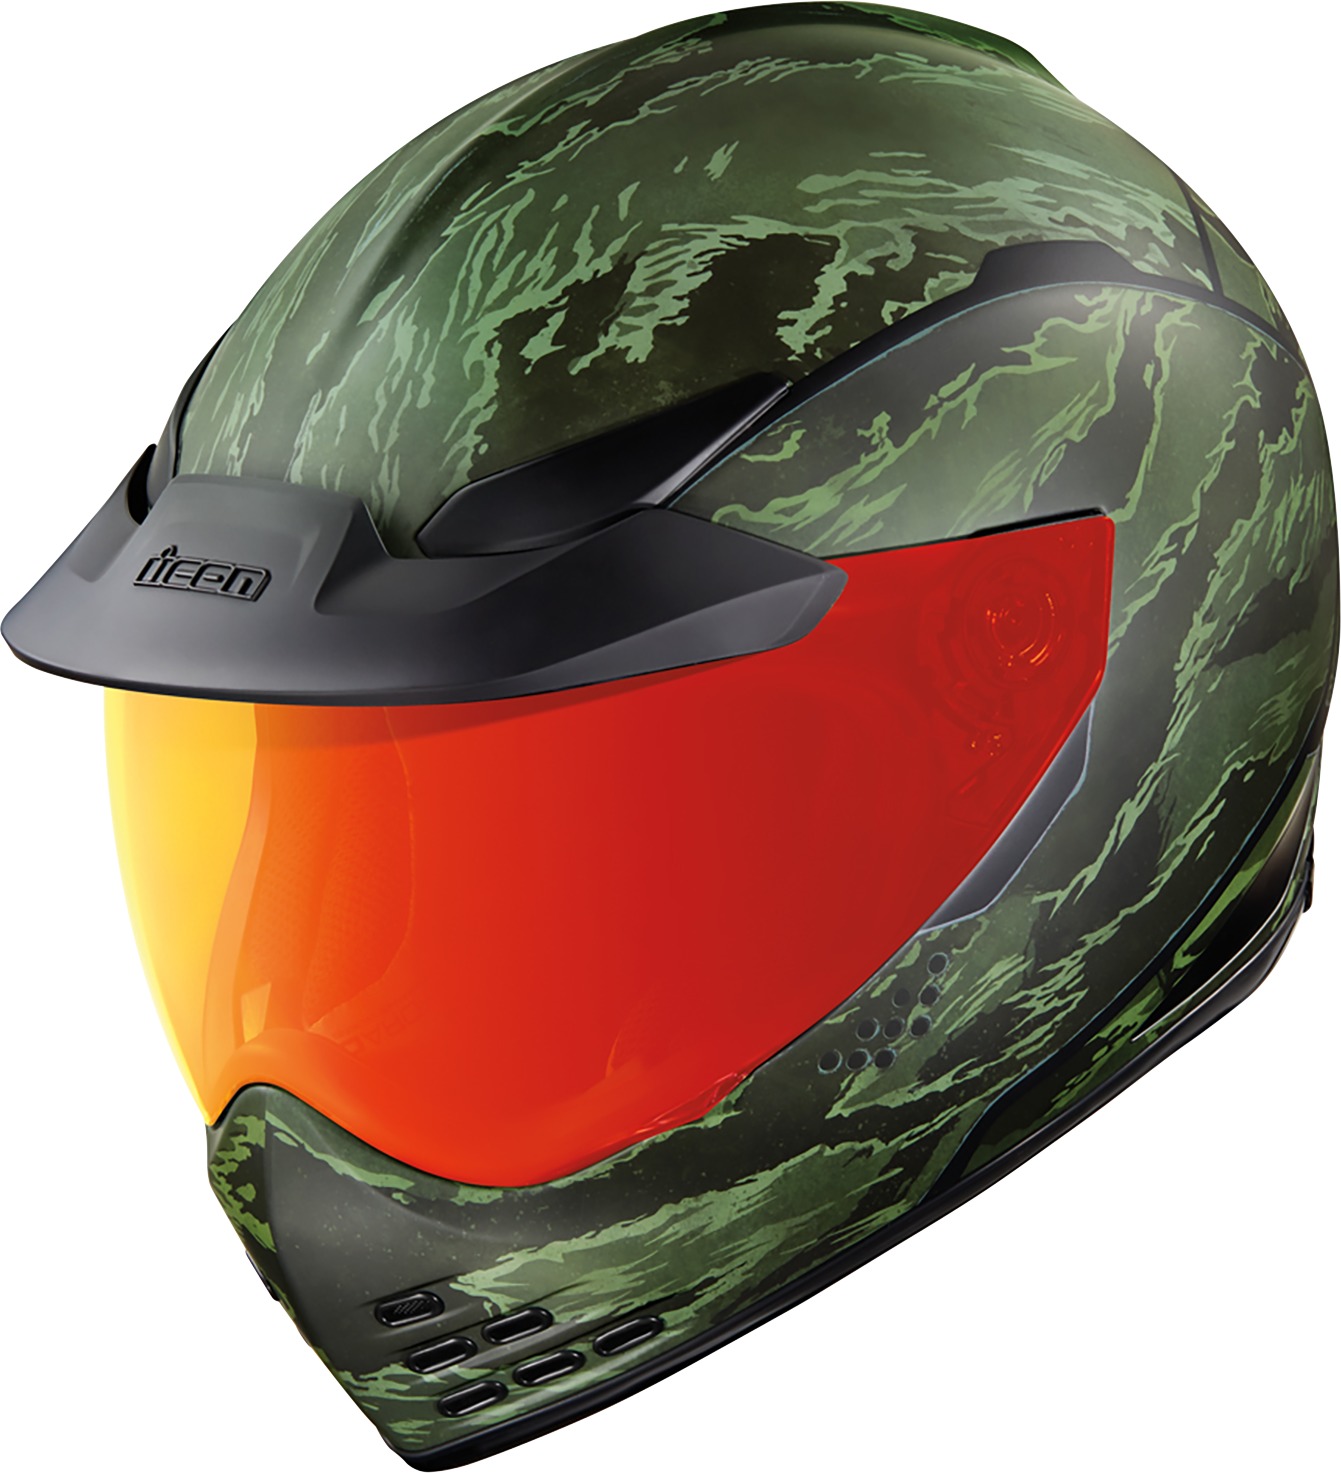 Domain Tiger's Blood Helmet Green XS - Click Image to Close